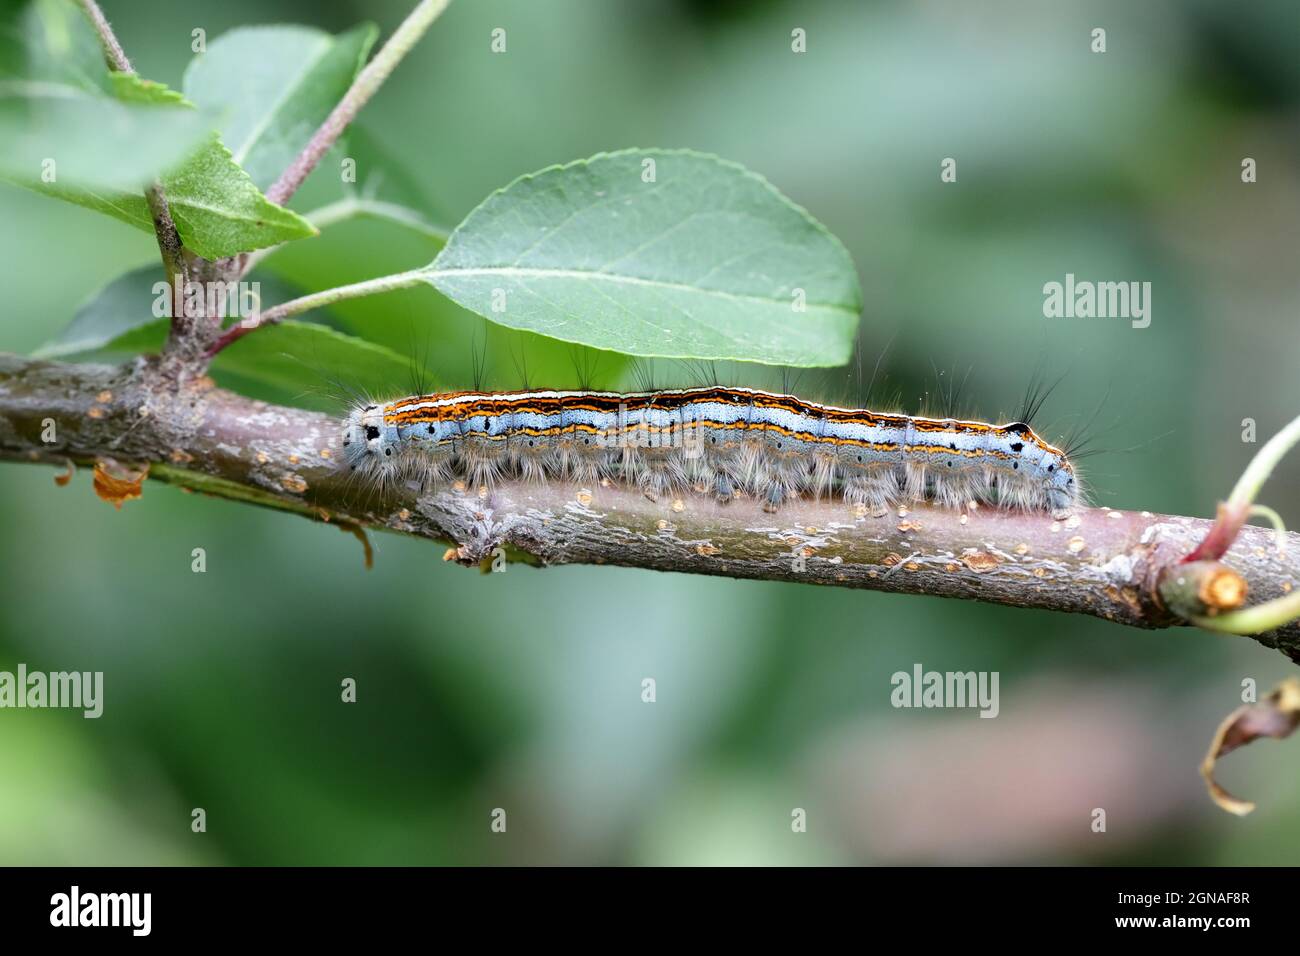 The lackey moth (Malacosoma neustria). Caterpillars can cause significant damage to apple, plum and other orchards. Stock Photo